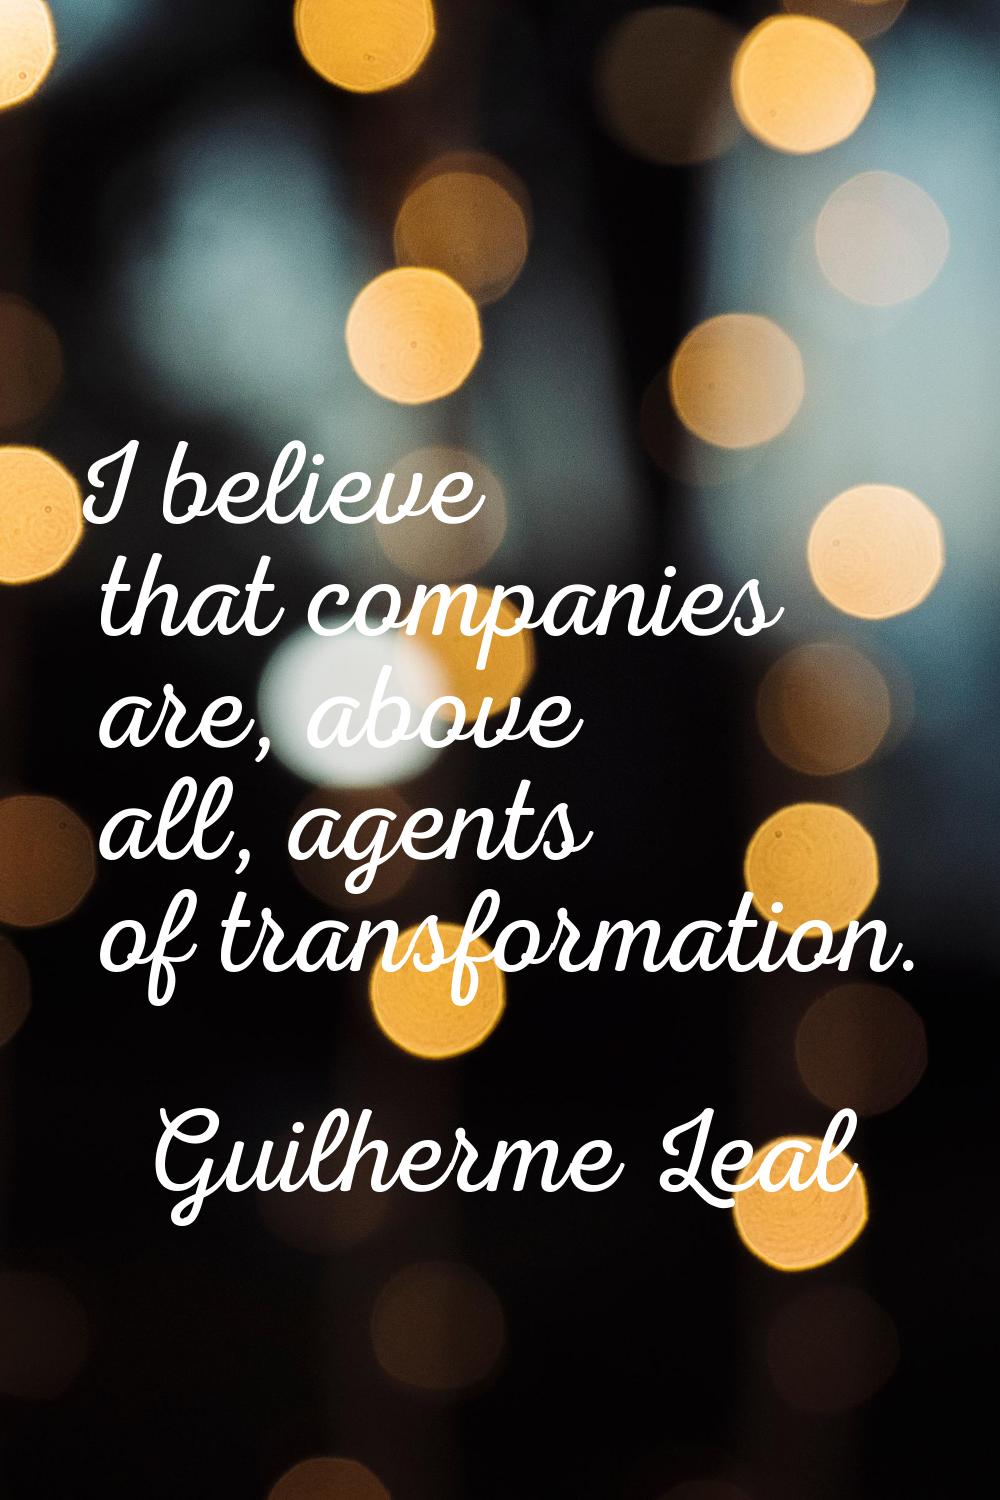 I believe that companies are, above all, agents of transformation.